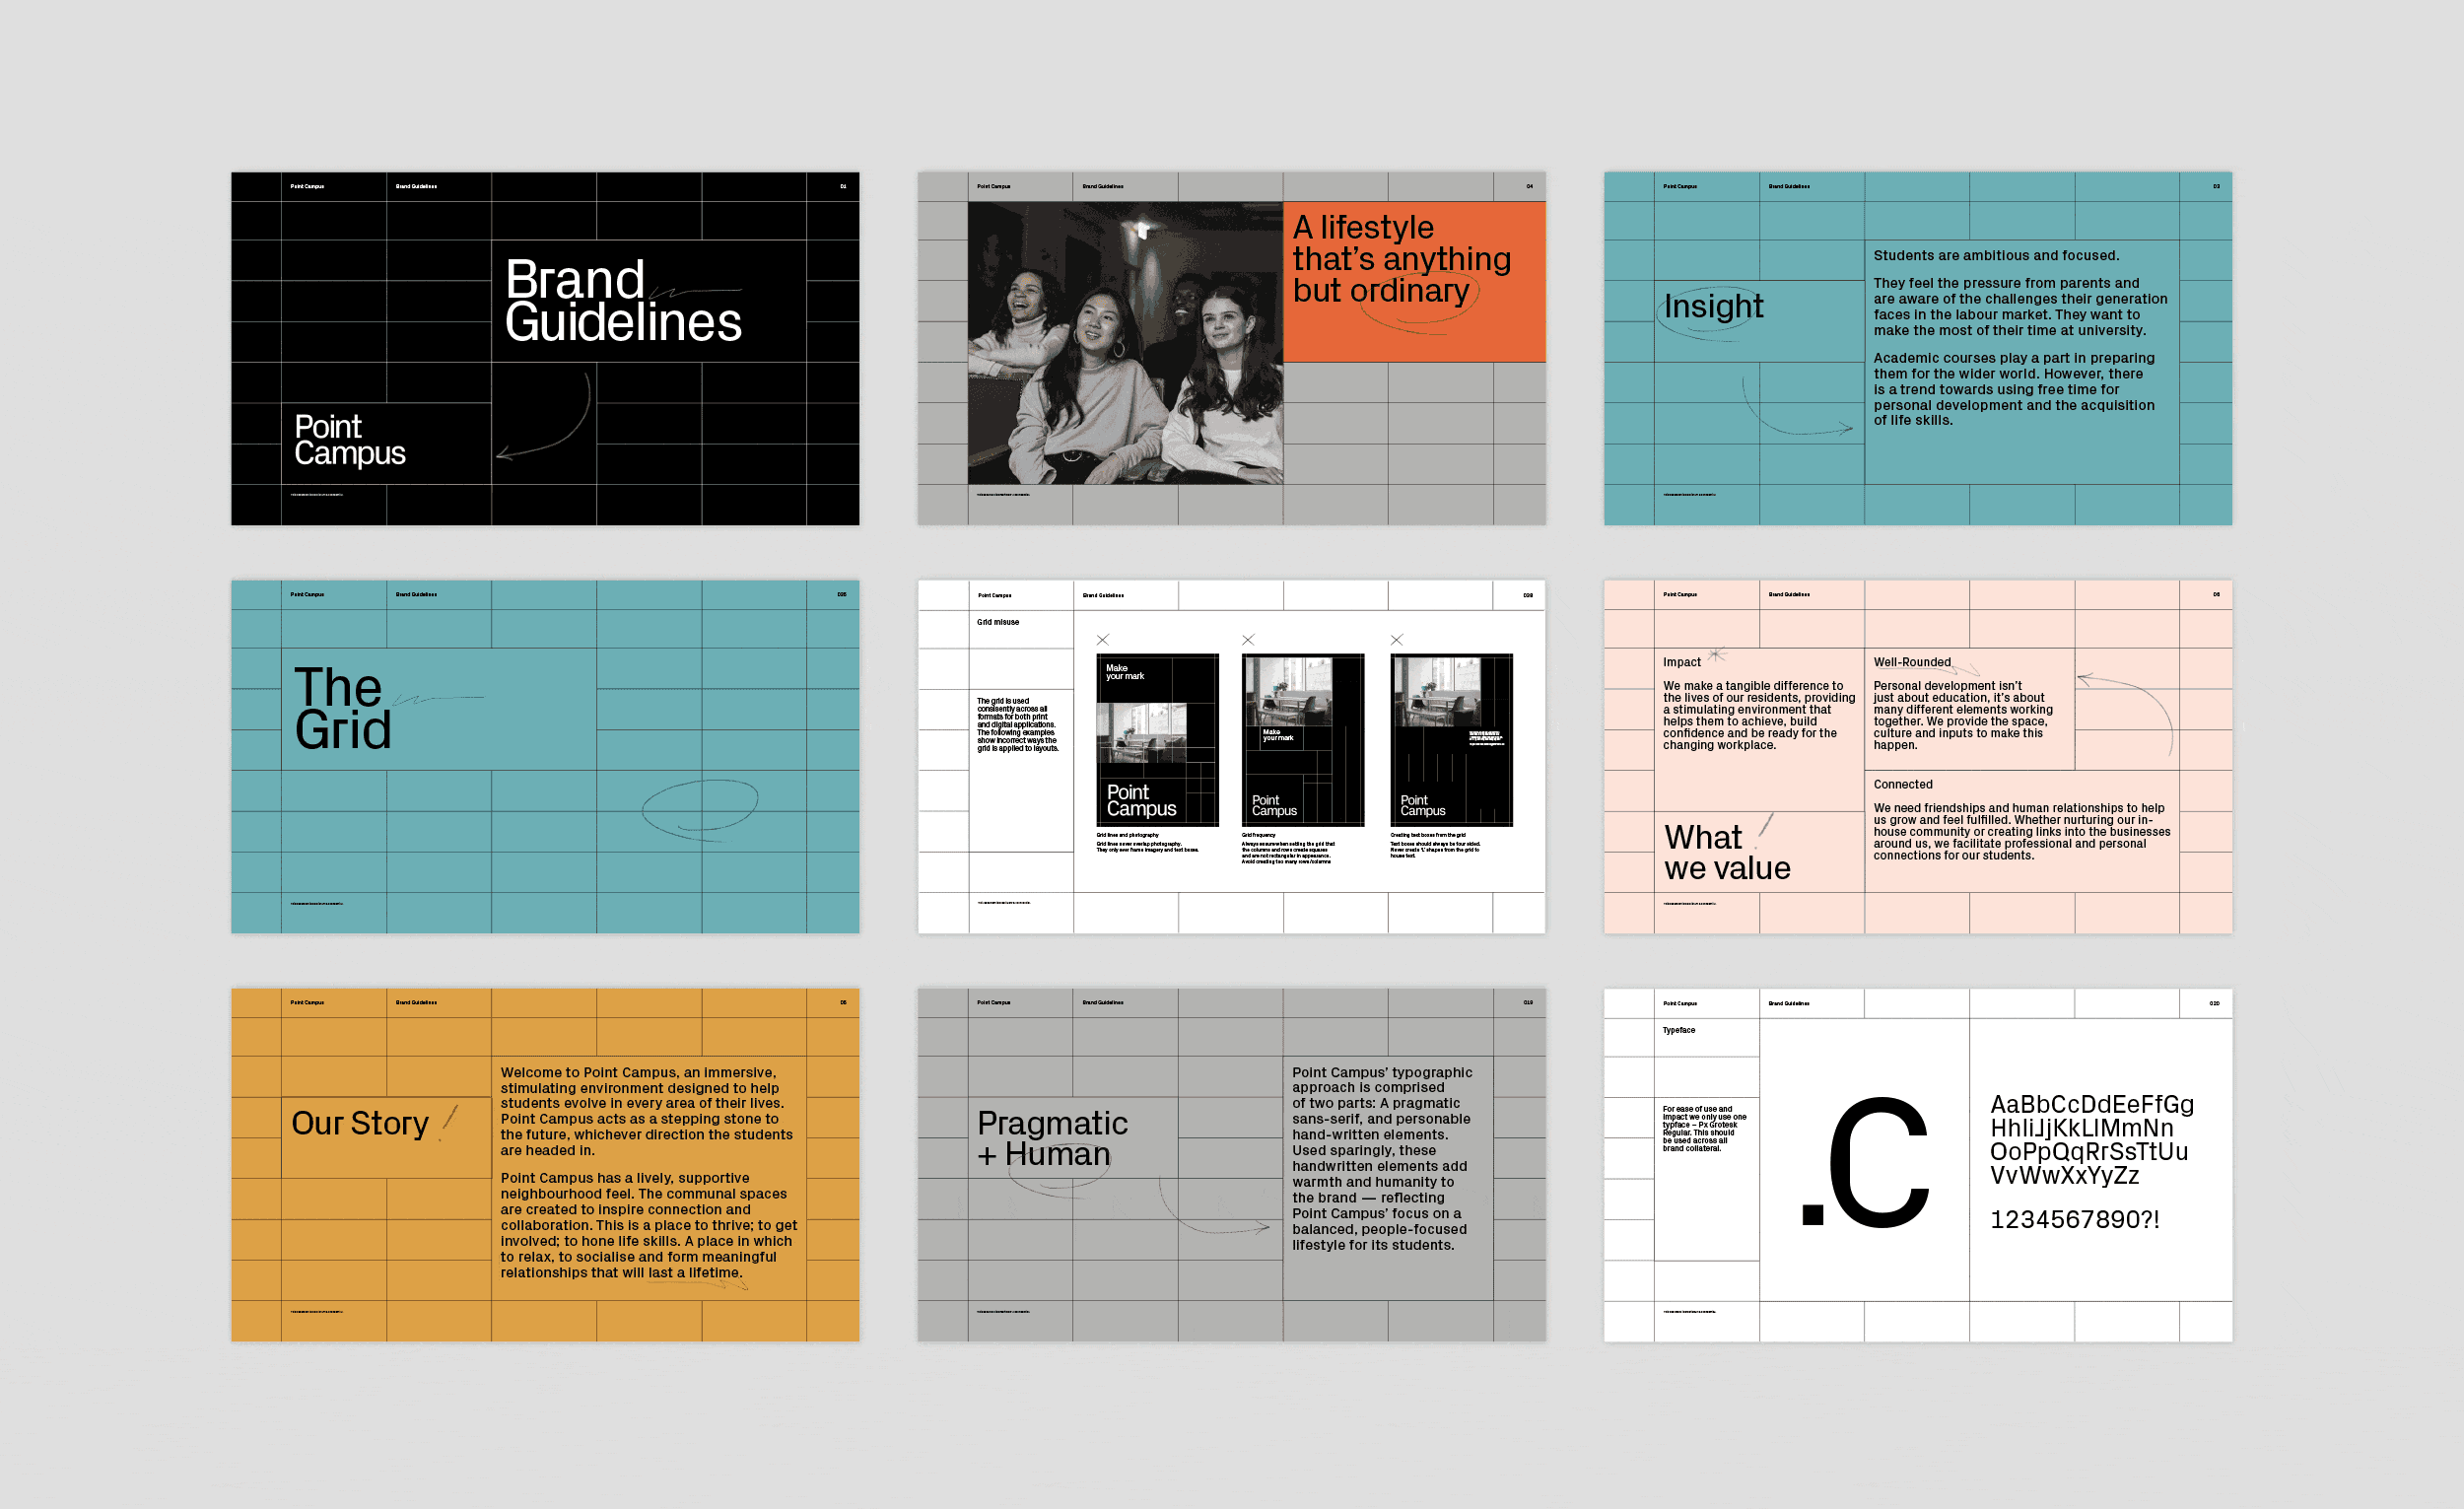 Point Campus brand guide